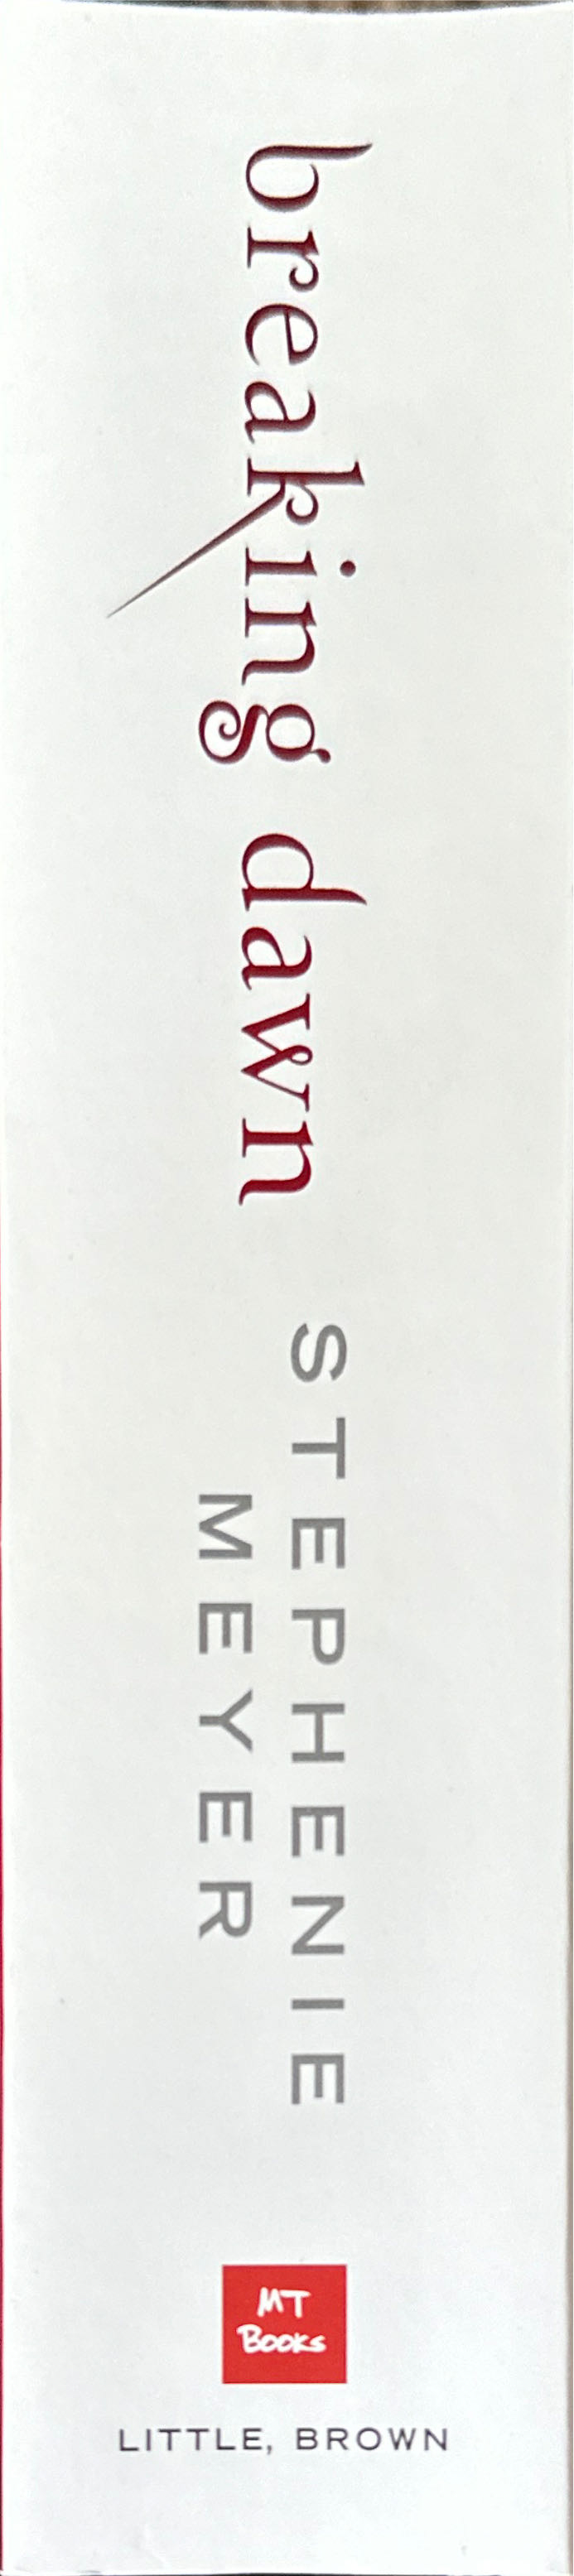 Breaking Dawn - Stephenie Meyer (Atom Books - Paperback) book collectible [Barcode 9781907410512] - Main Image 3